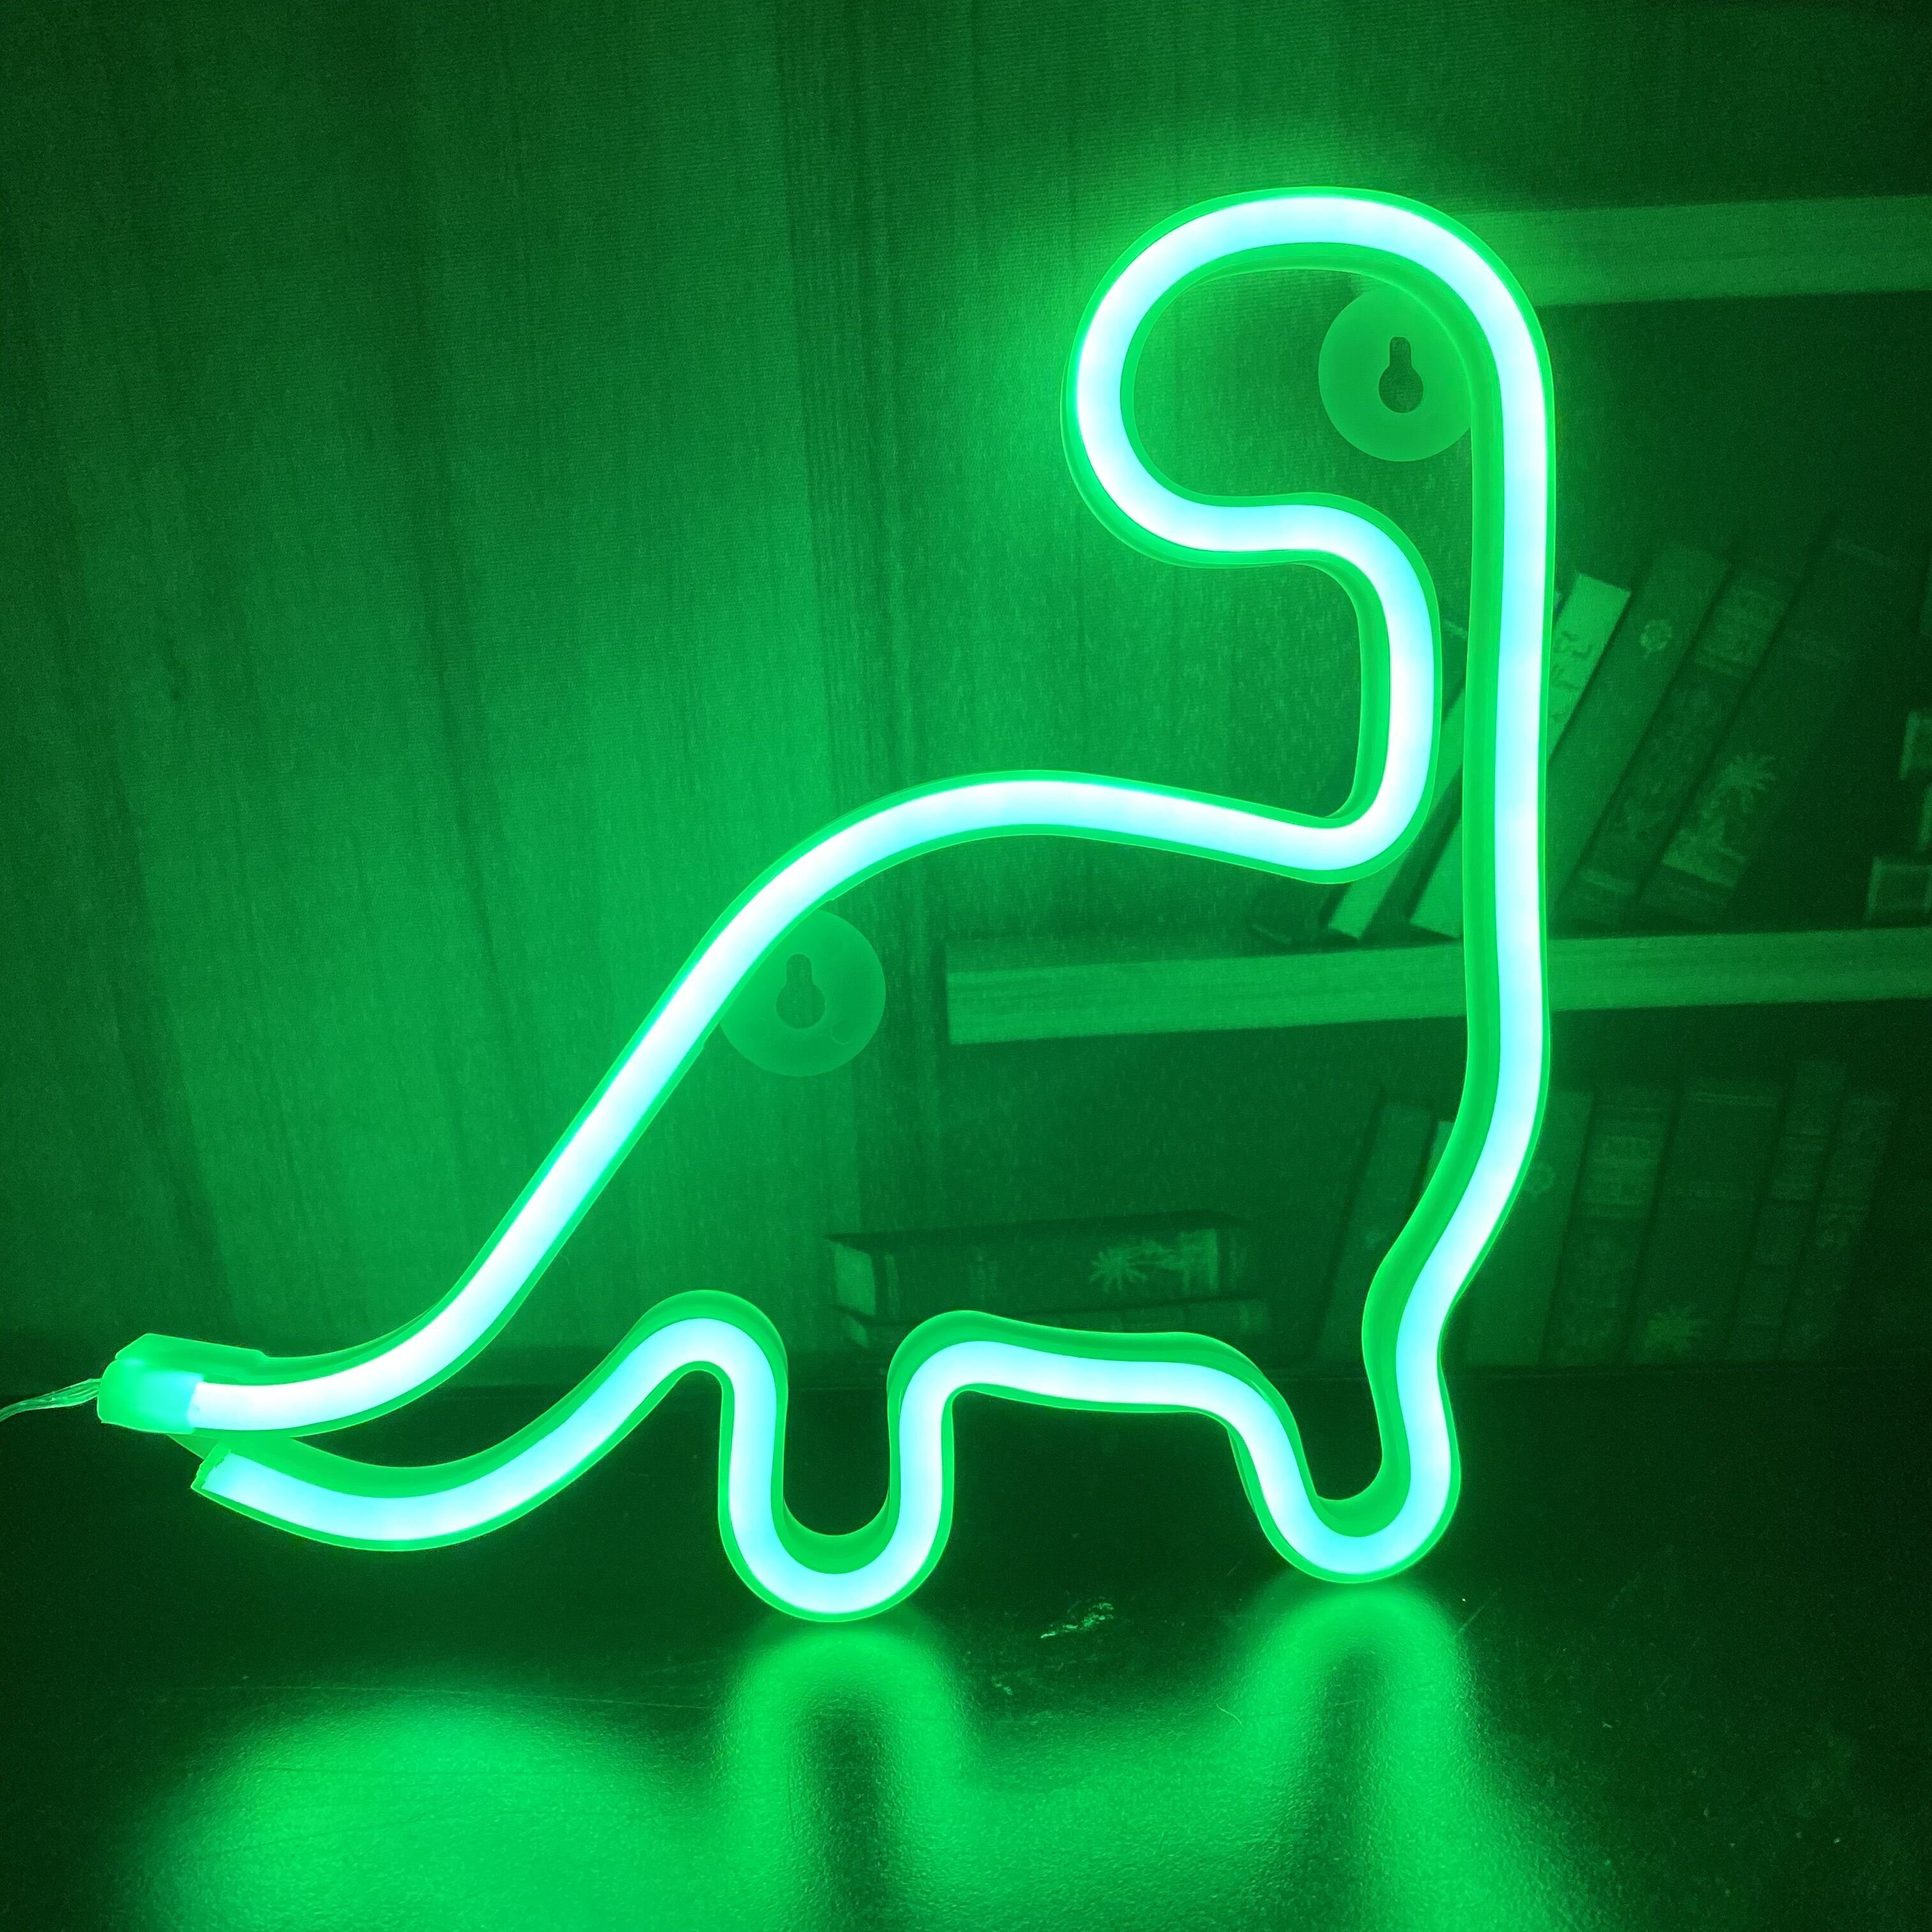 A green neon sign in the shape of a dinosaur. - Neon green, dinosaur